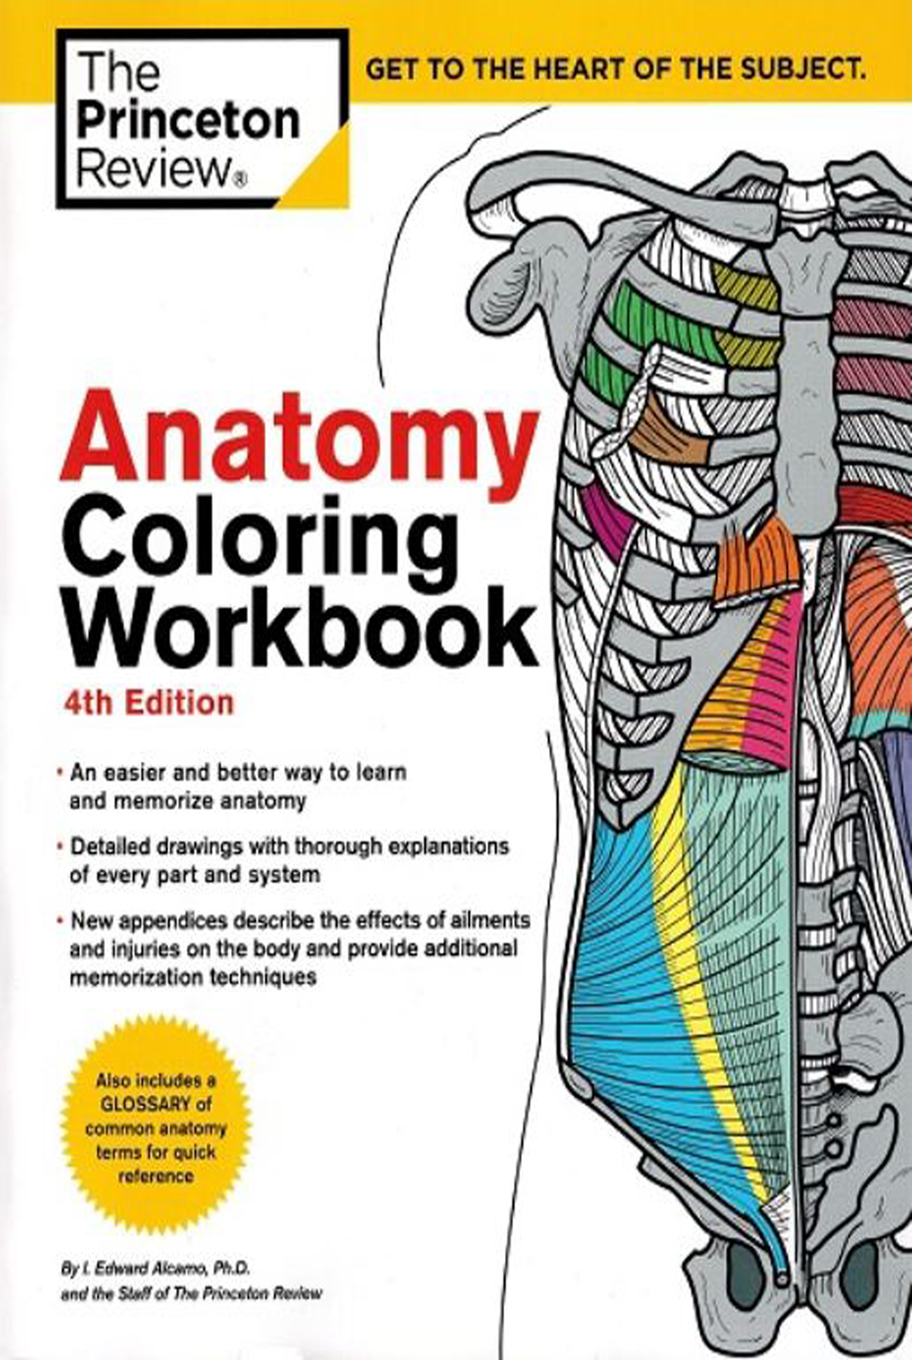 Anatomy Coloring Workbook Book & Test Mailed Scrubs Continuing